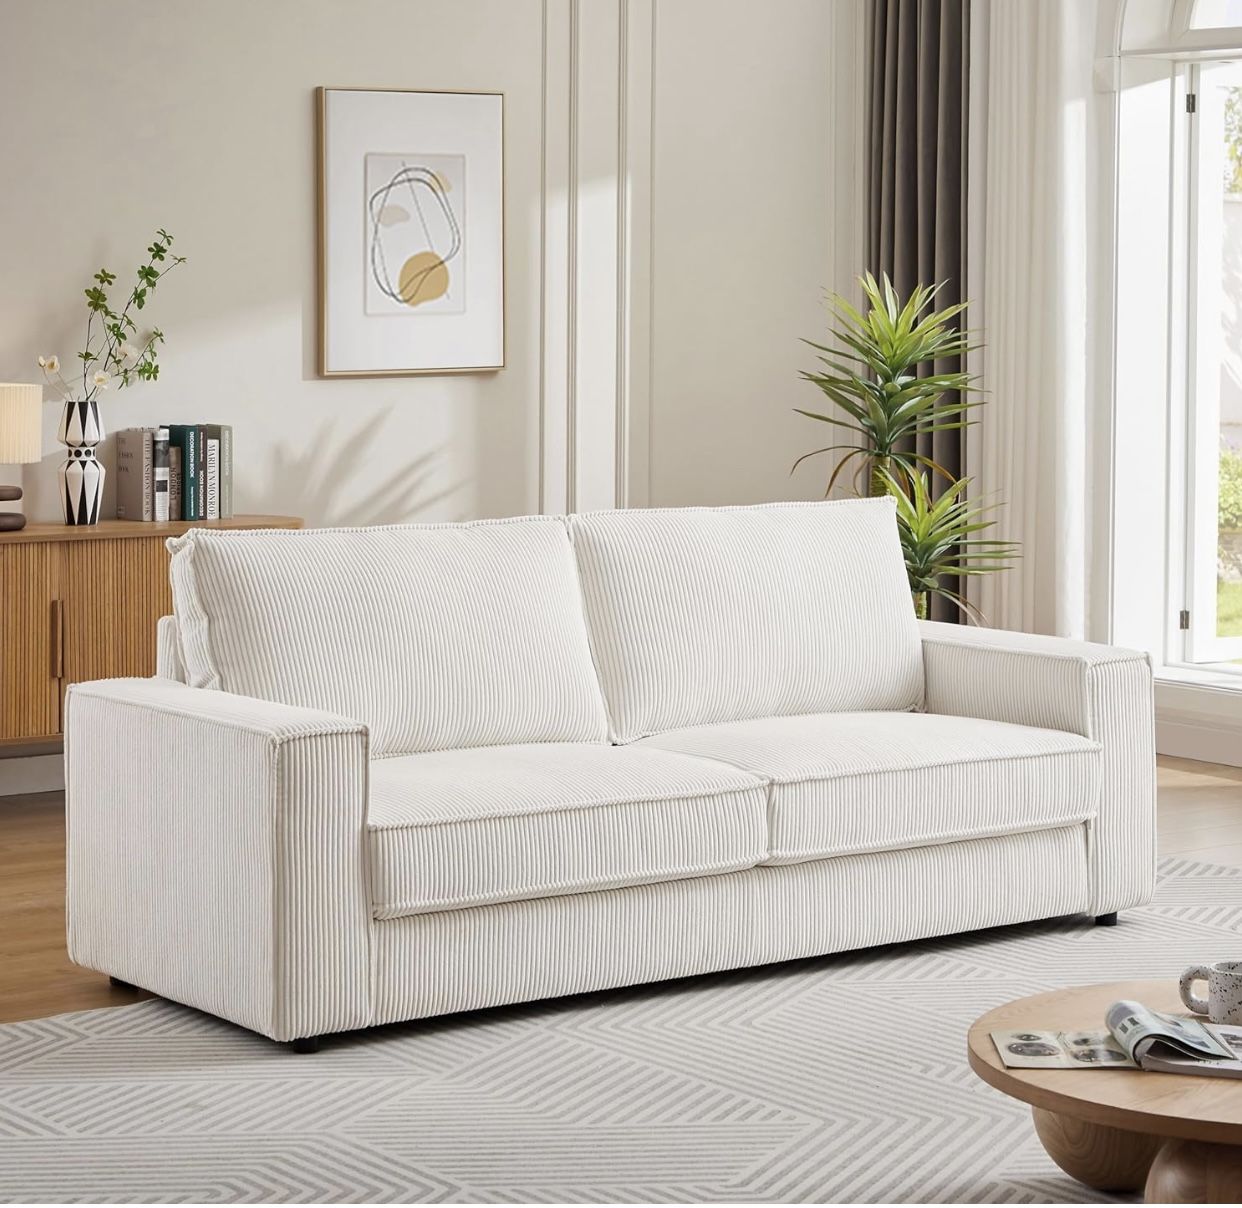 New in box Vanomi 88" Loveseat Sofa, Modern and Cozy Corduroy Fabric Couch with Thick Seat Cushion